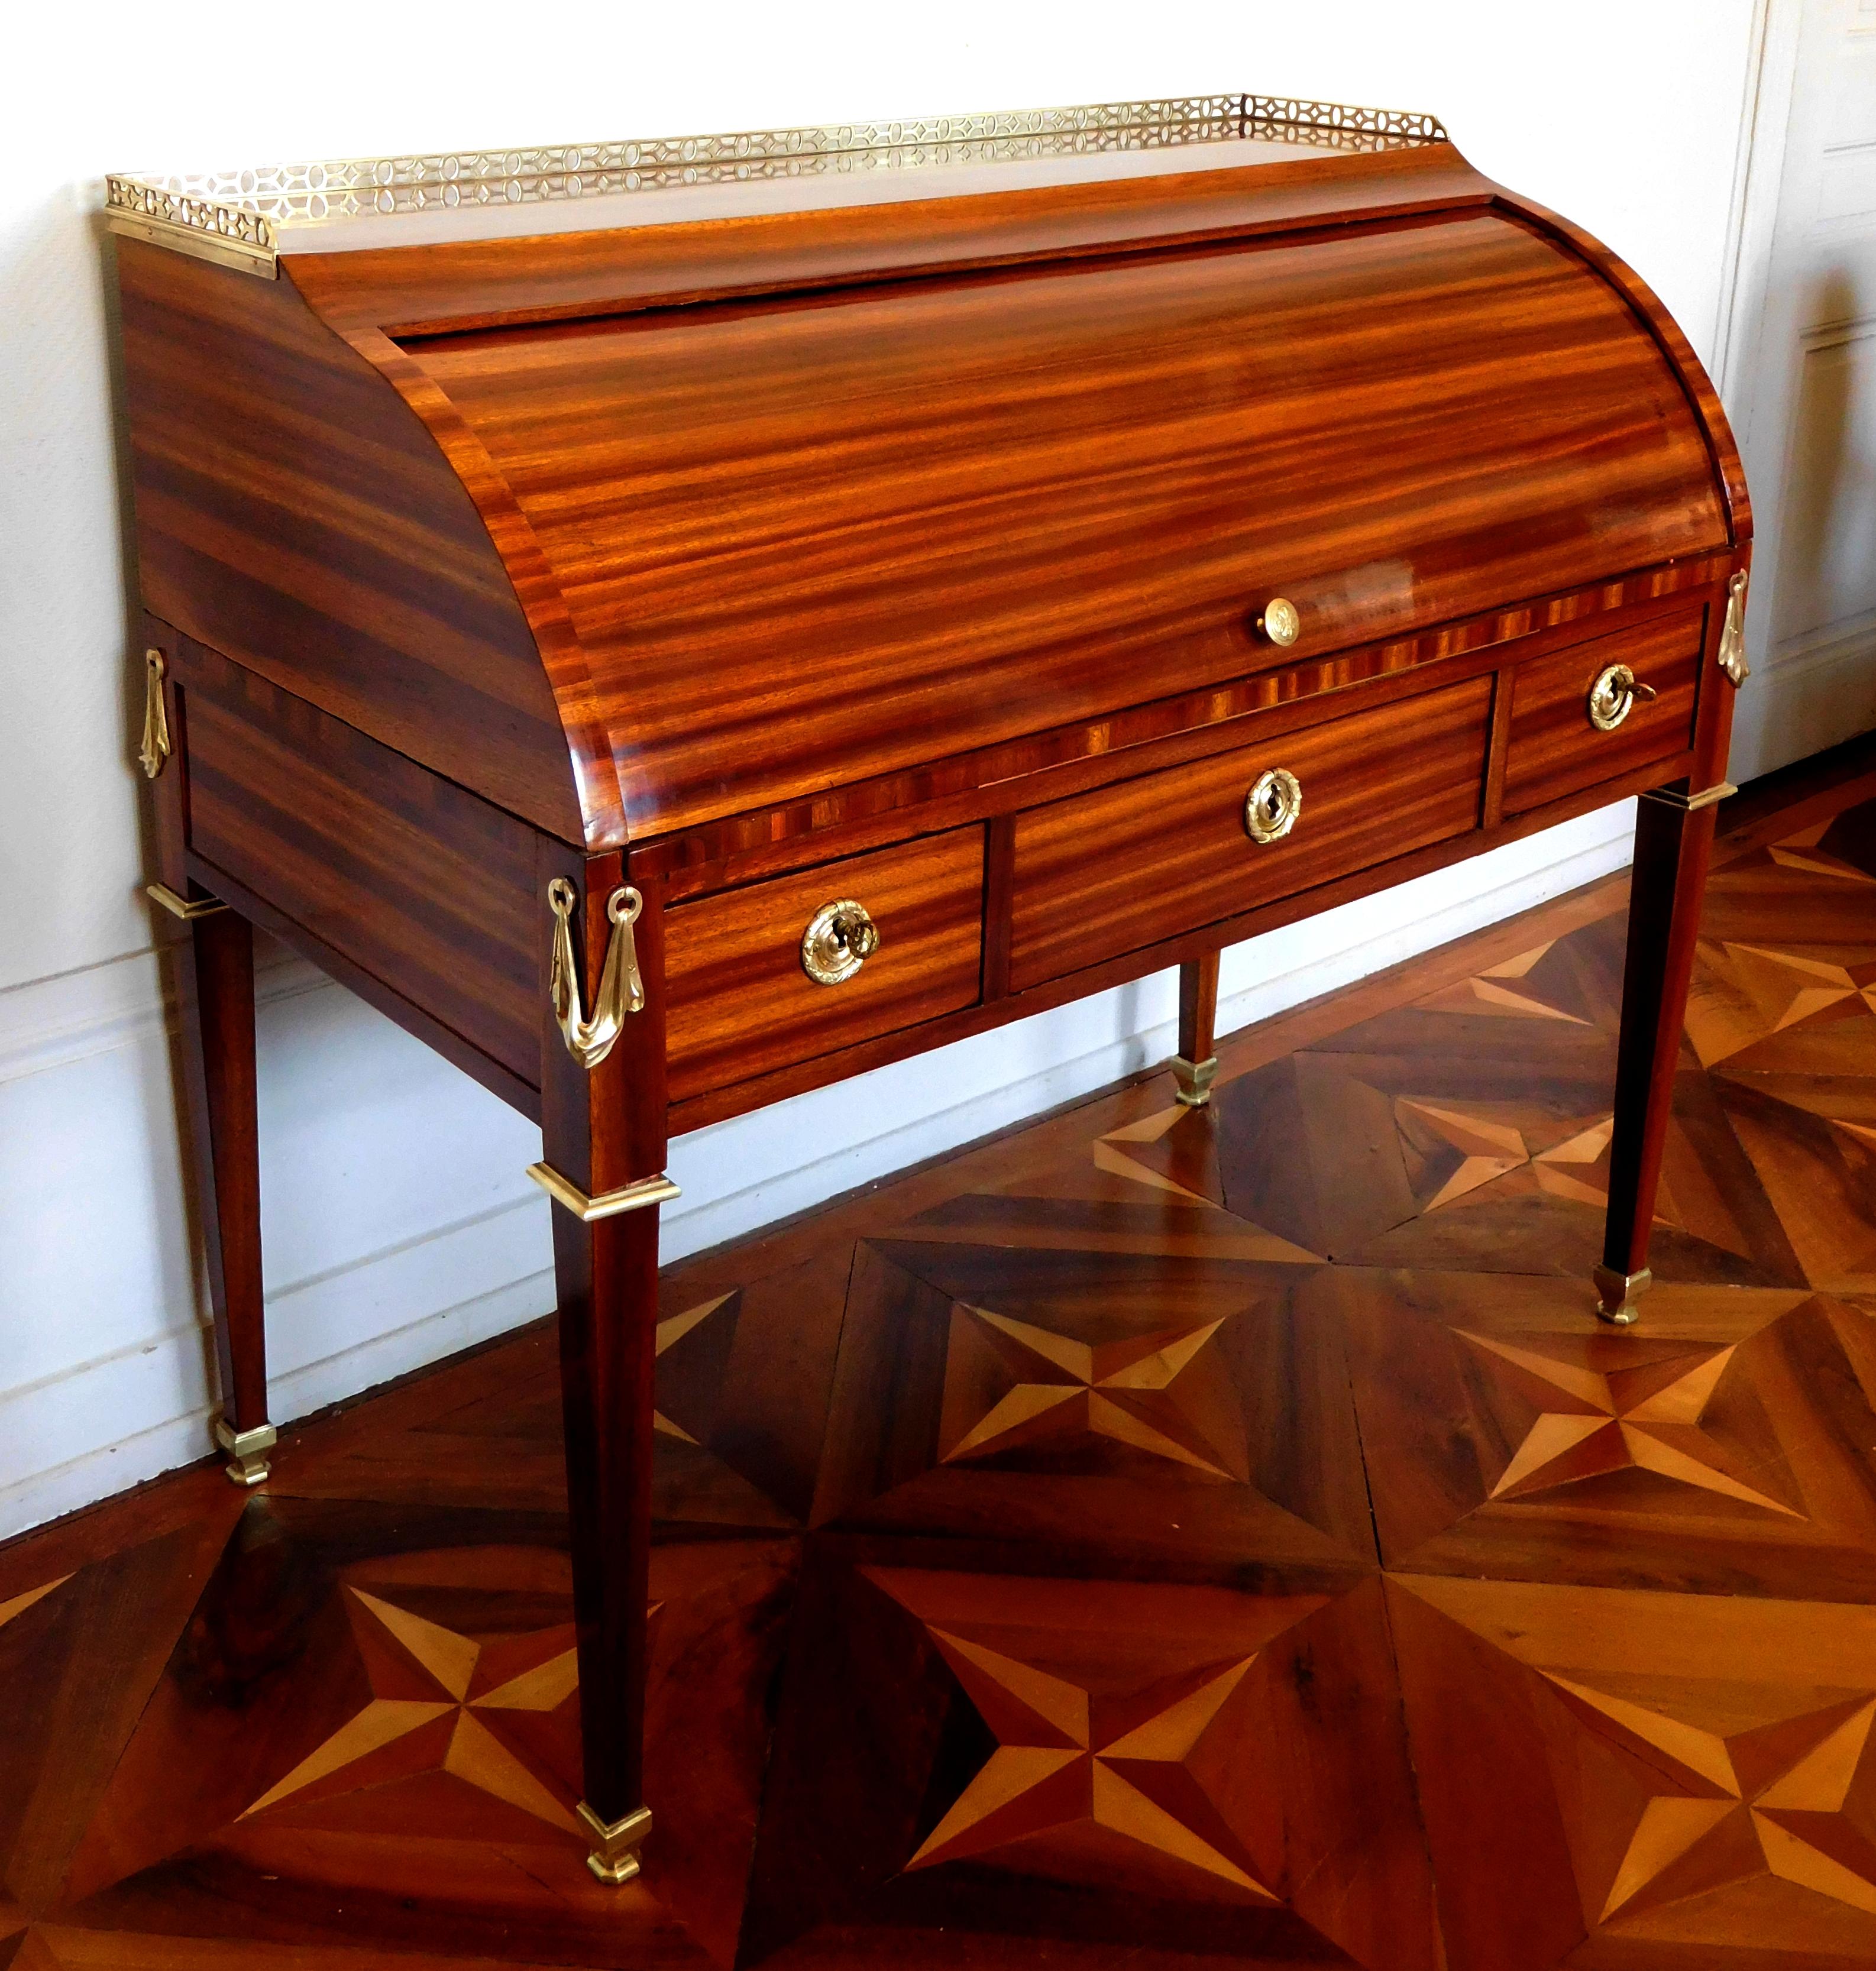 Louis XVI Satinwood Roll Top Desk by Macret - Stamped - 18th Century circa 1780 For Sale 1